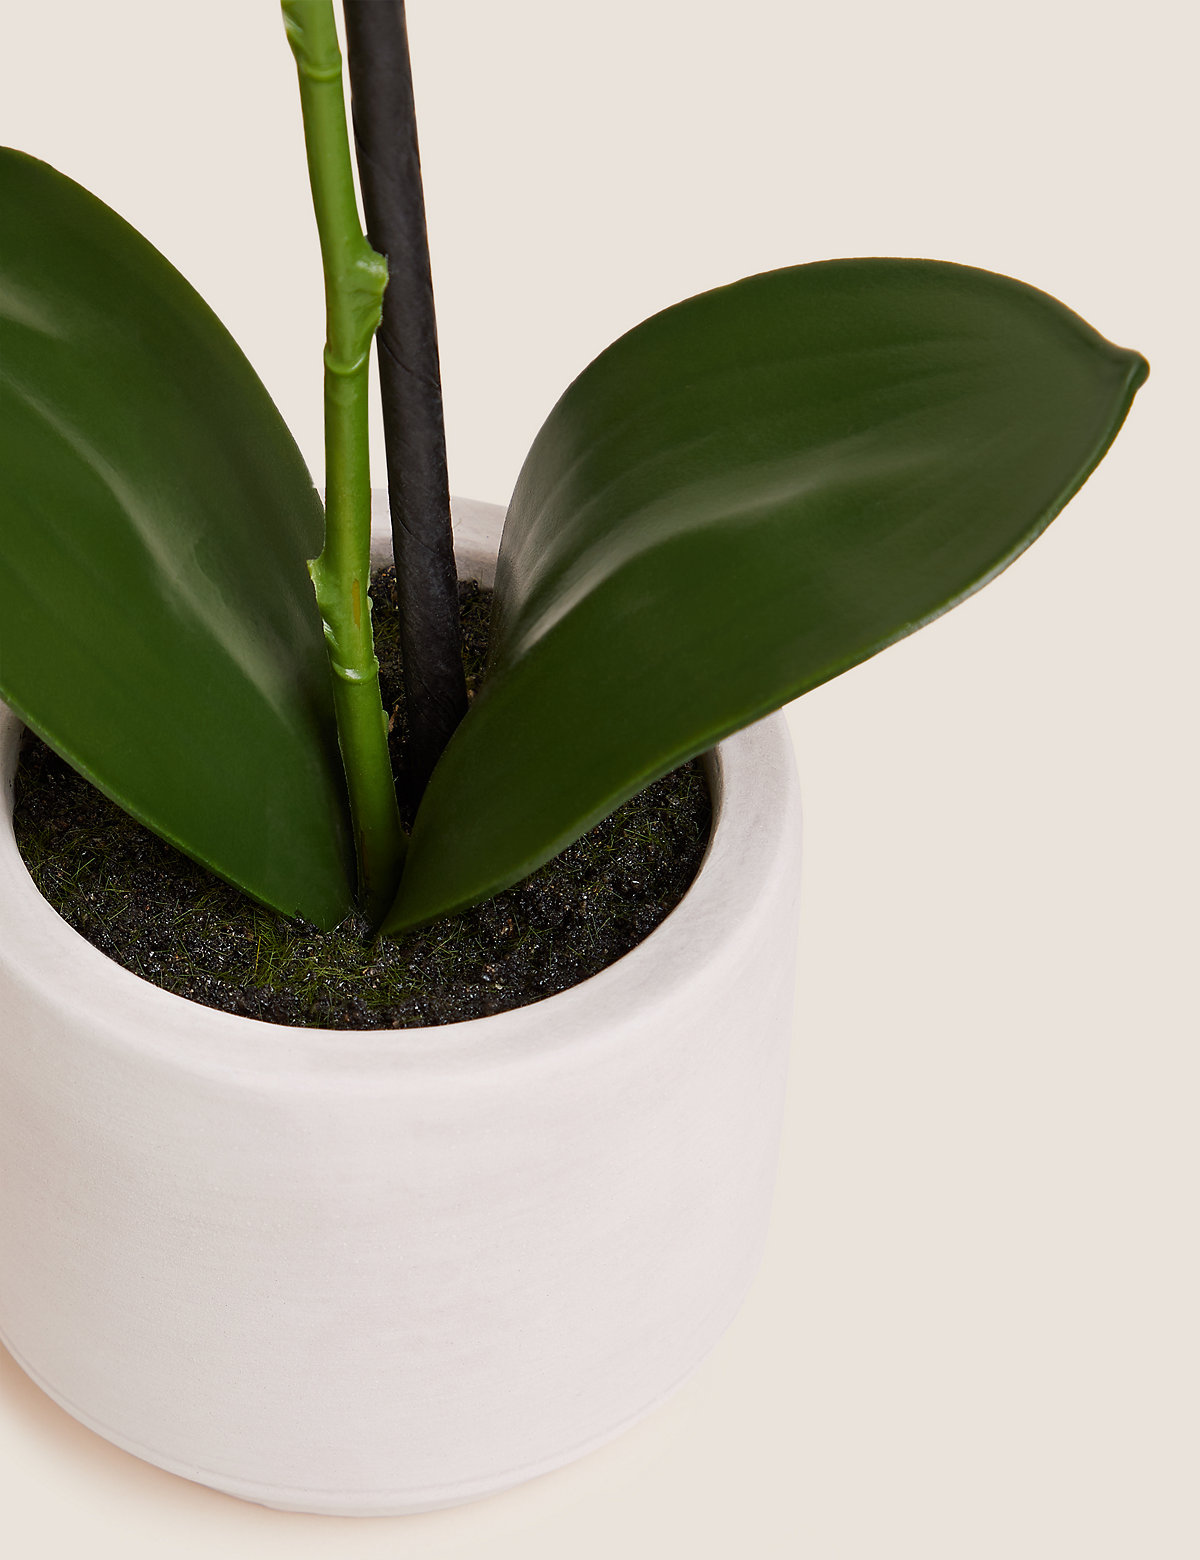 Artificial Real Touch Small Orchid in Pot